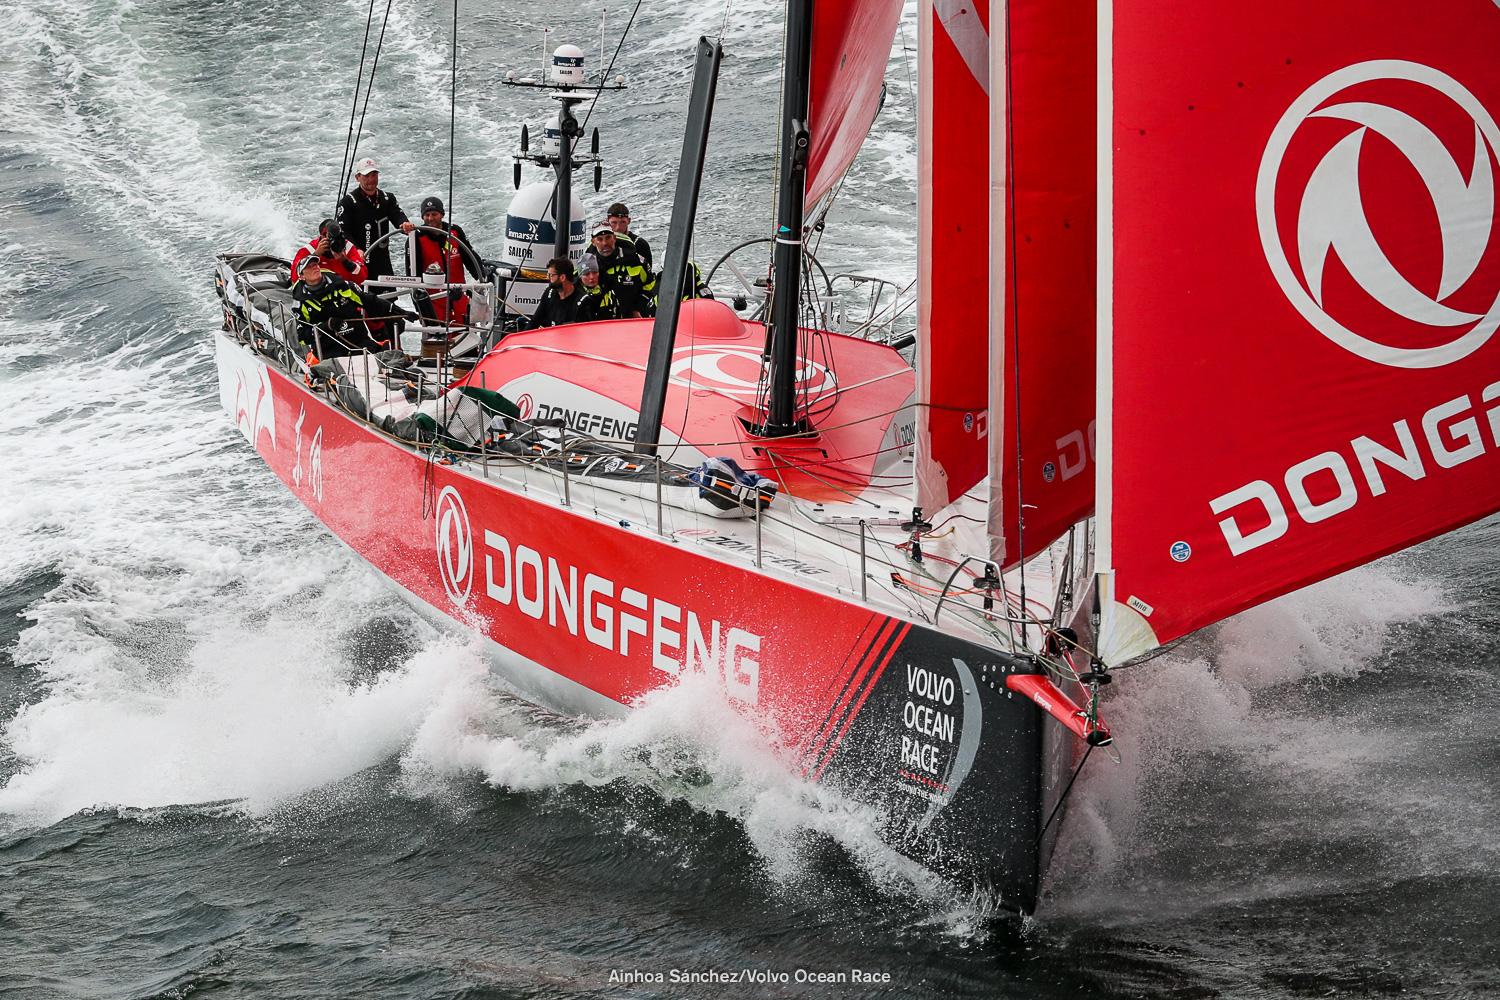 A hard-fought second place finish for Dongfeng Race Team preserves their position near the top of the leaderboard